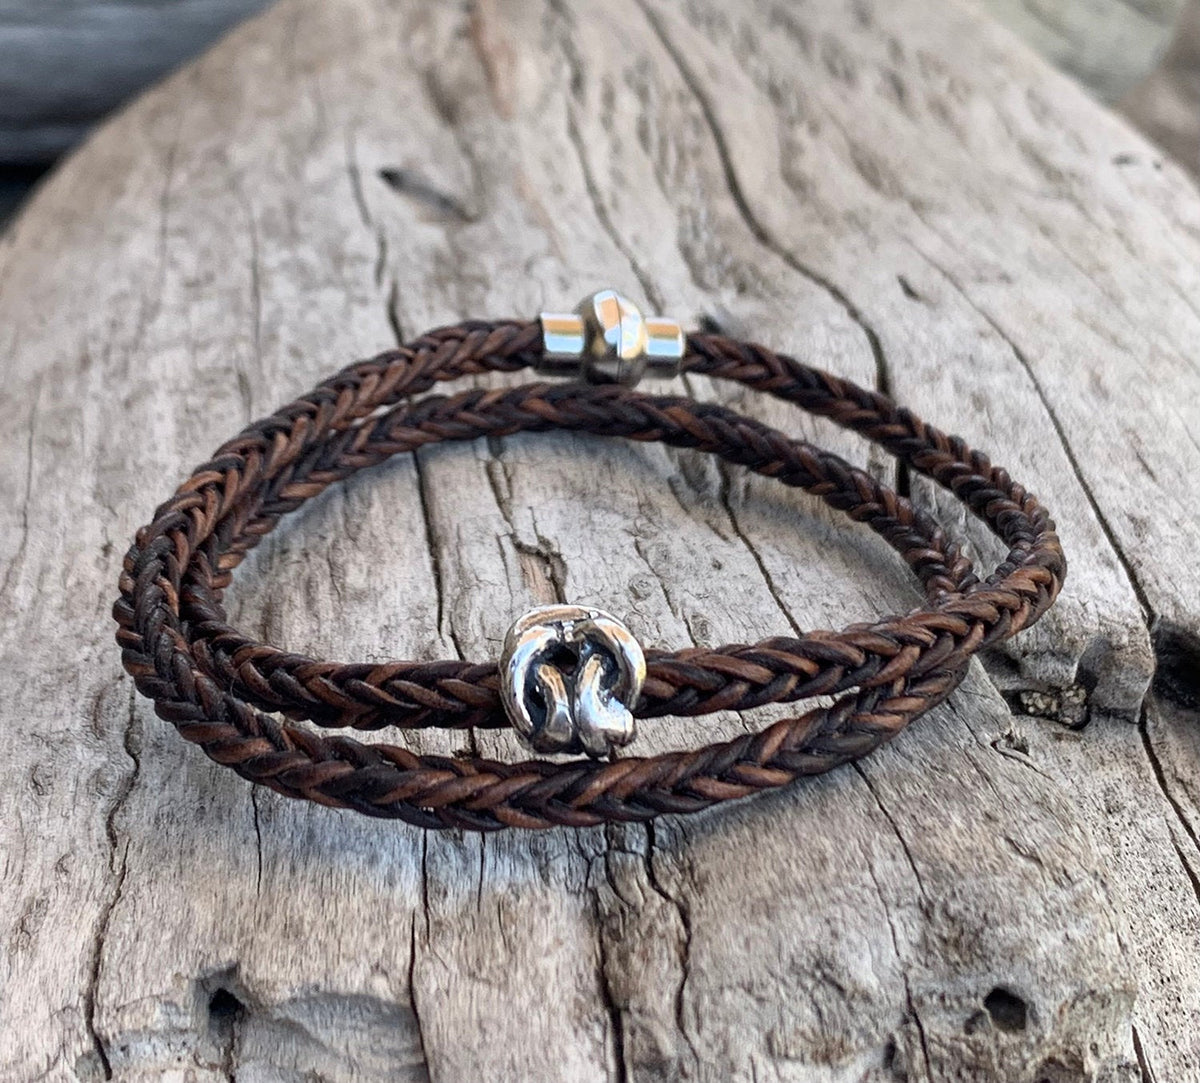 Silver and Leather Cord bracelet, handmade, 2 mm